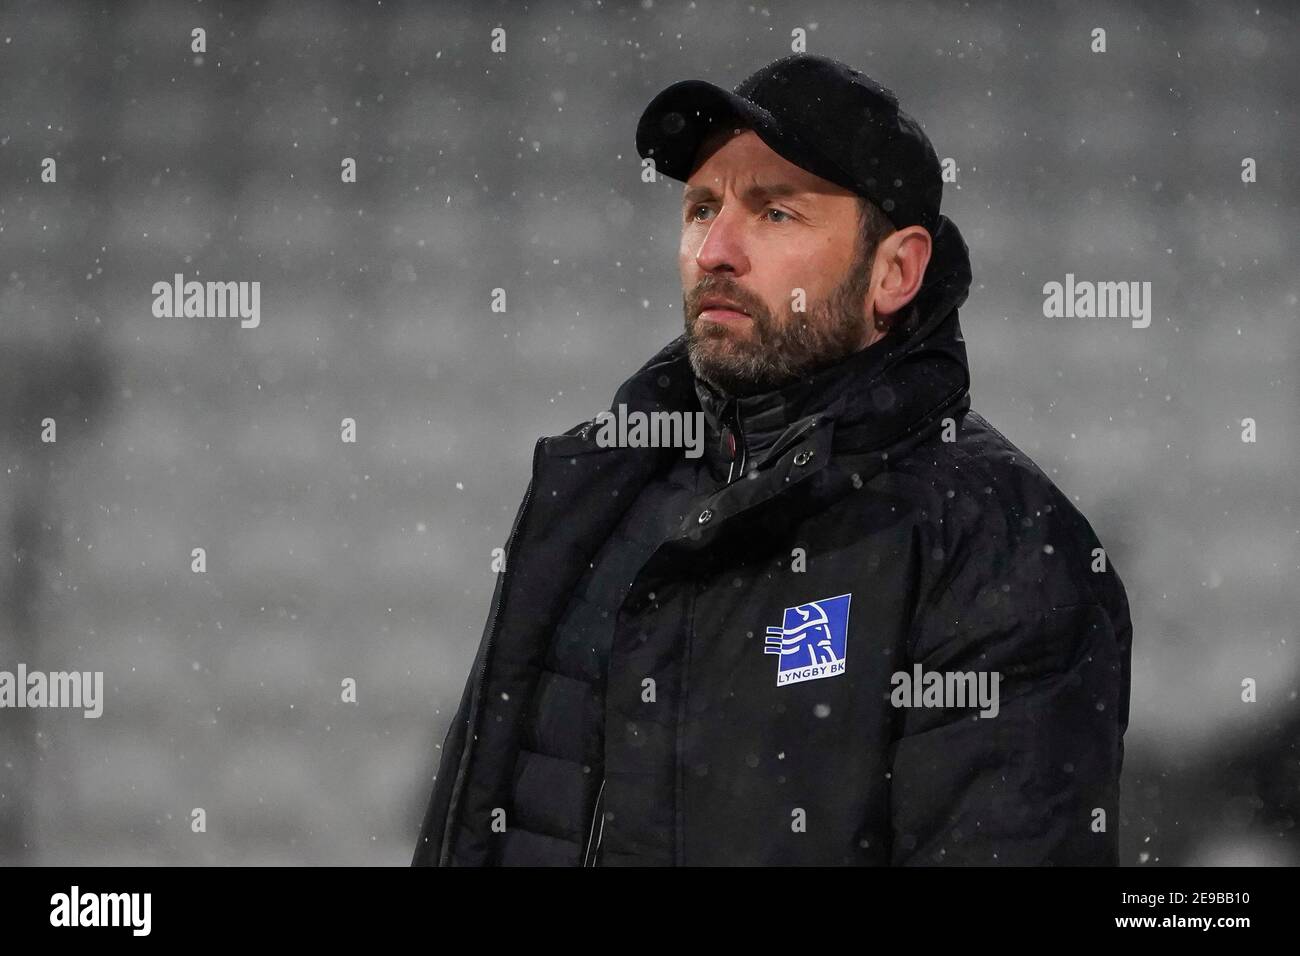 Odense, Denmark. 03rd Feb, 2021. Head coach Carit Falch of Lyngby Boldklub  seen during the 3F Superliga match between Odense Boldklub and Lyngby  Boldklub at Nature Energy Park in Odense. (Photo Credit: